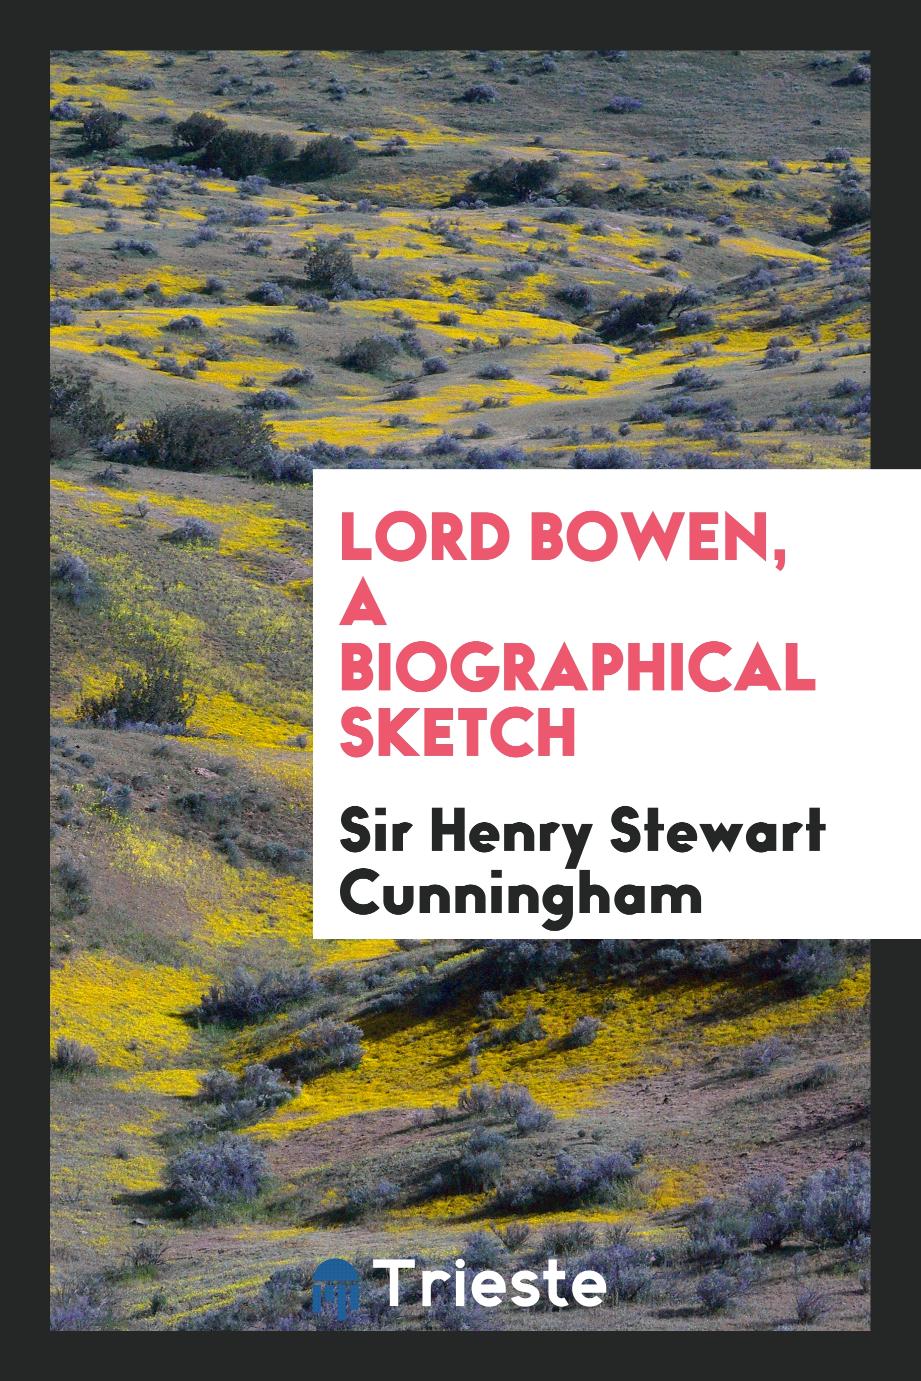 Lord Bowen, a biographical sketch